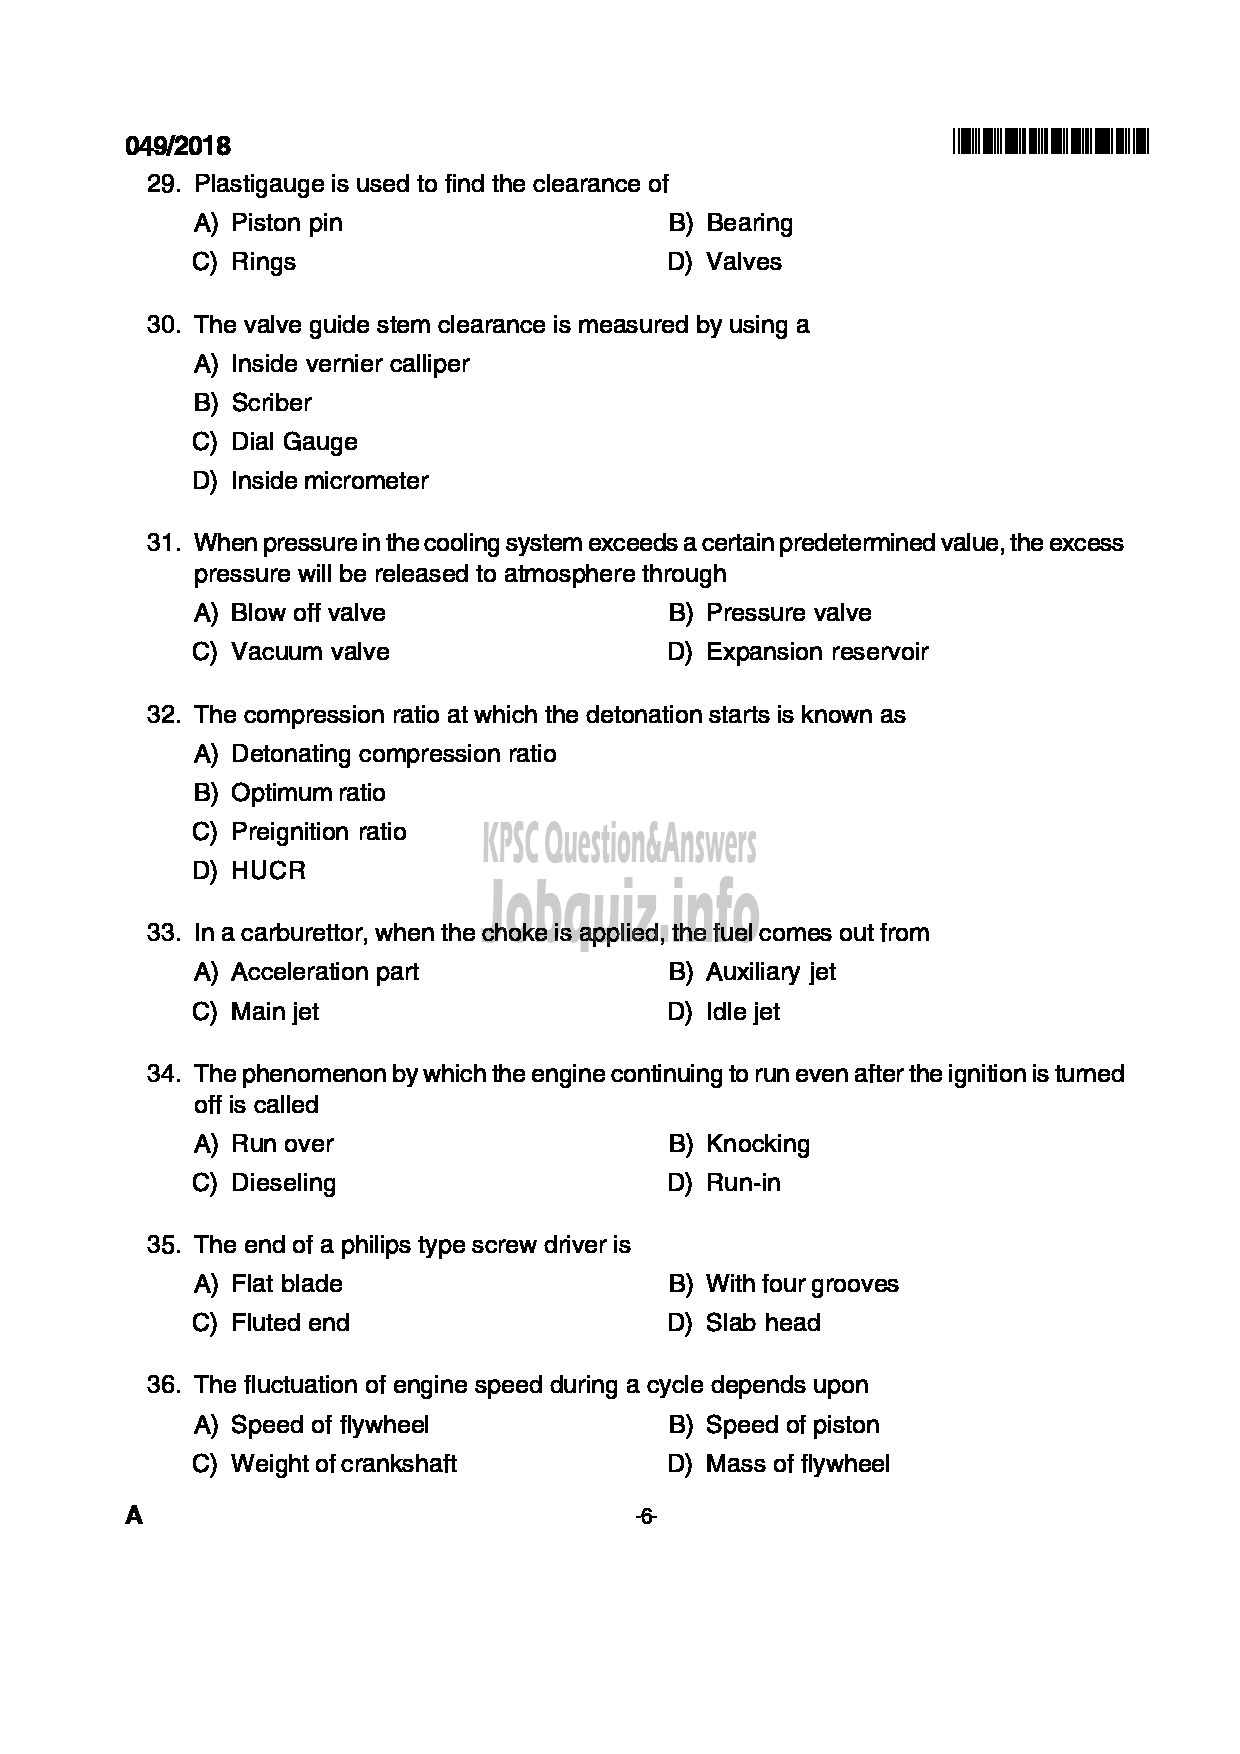 Kerala PSC Question Paper - VOCATIONAL INSTRUCTOR IN MAINTENANCE AND REPAIRS OF AUTOMOBILES VOCATIONAL HIGHER SECONDARY EDUCATION-6